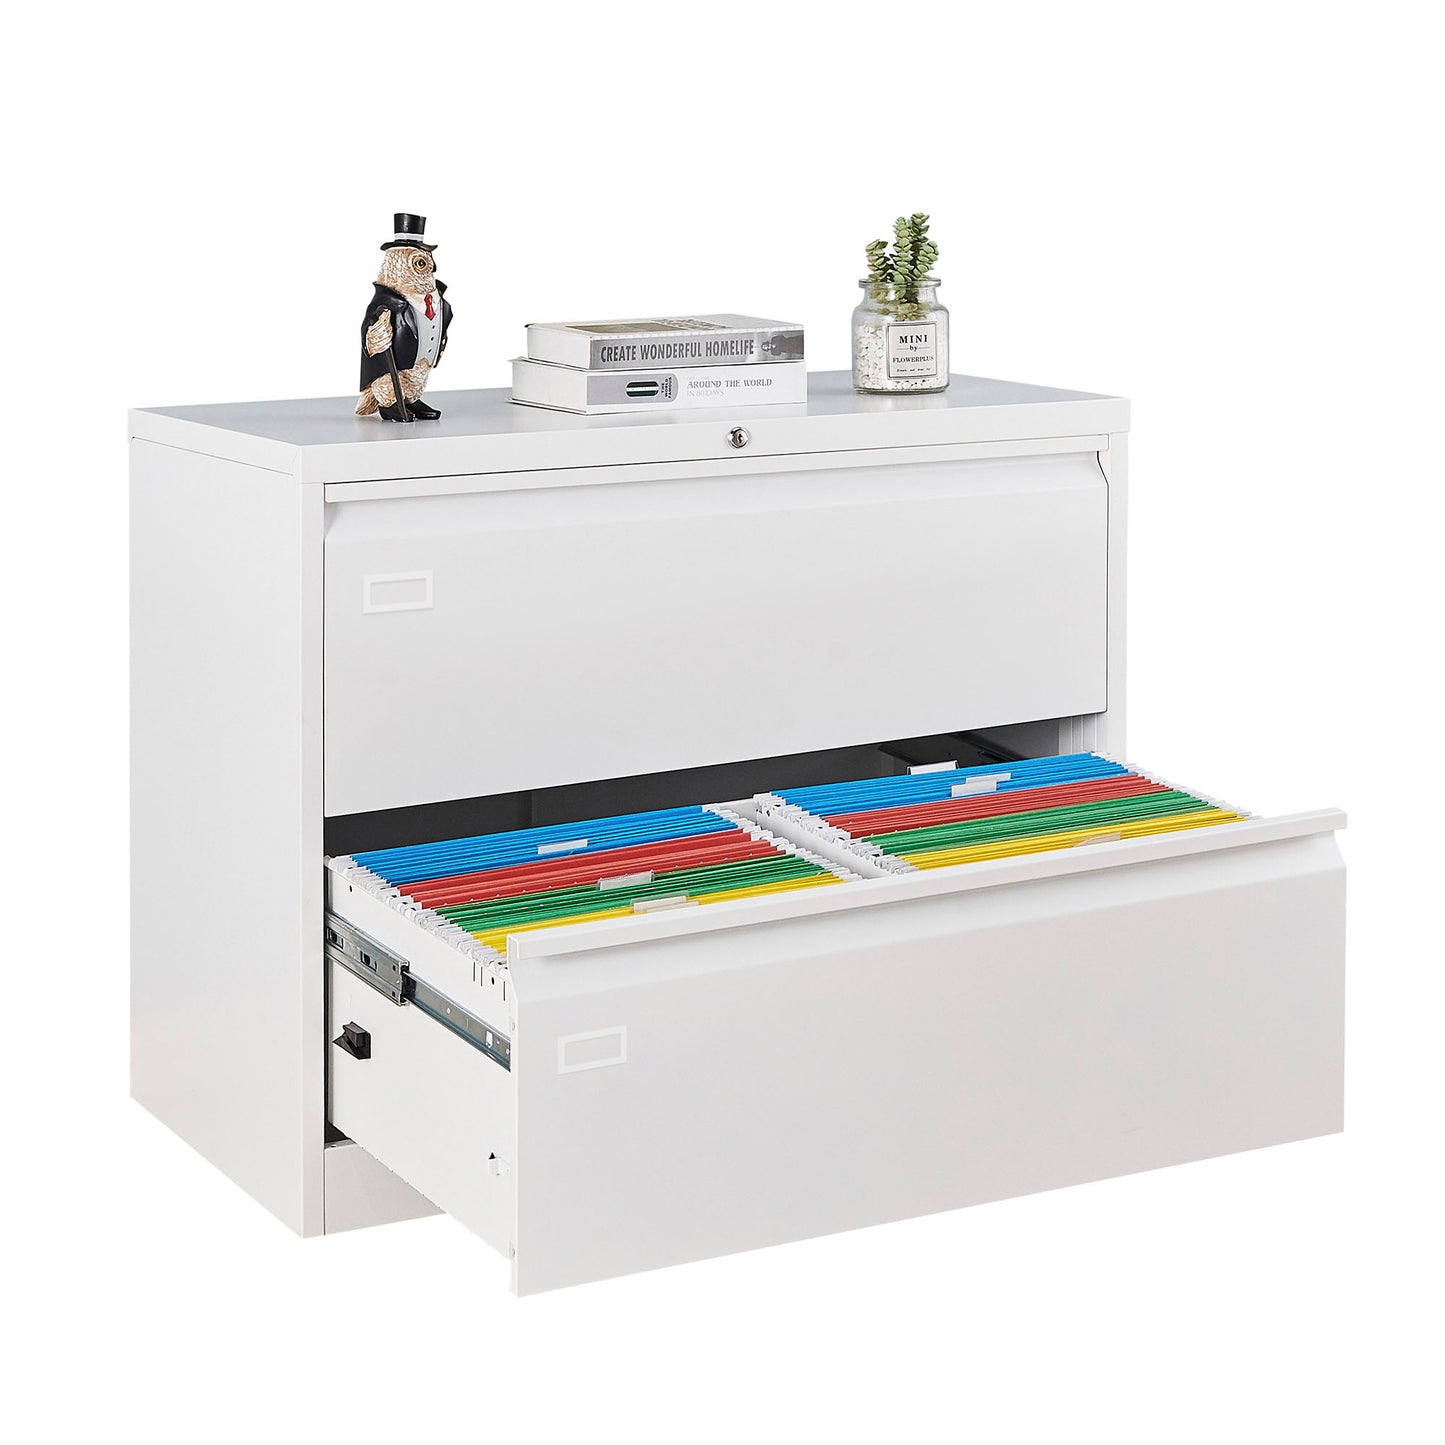 Lockable 2 Drawer Lateral Filing Cabinet for Home Office